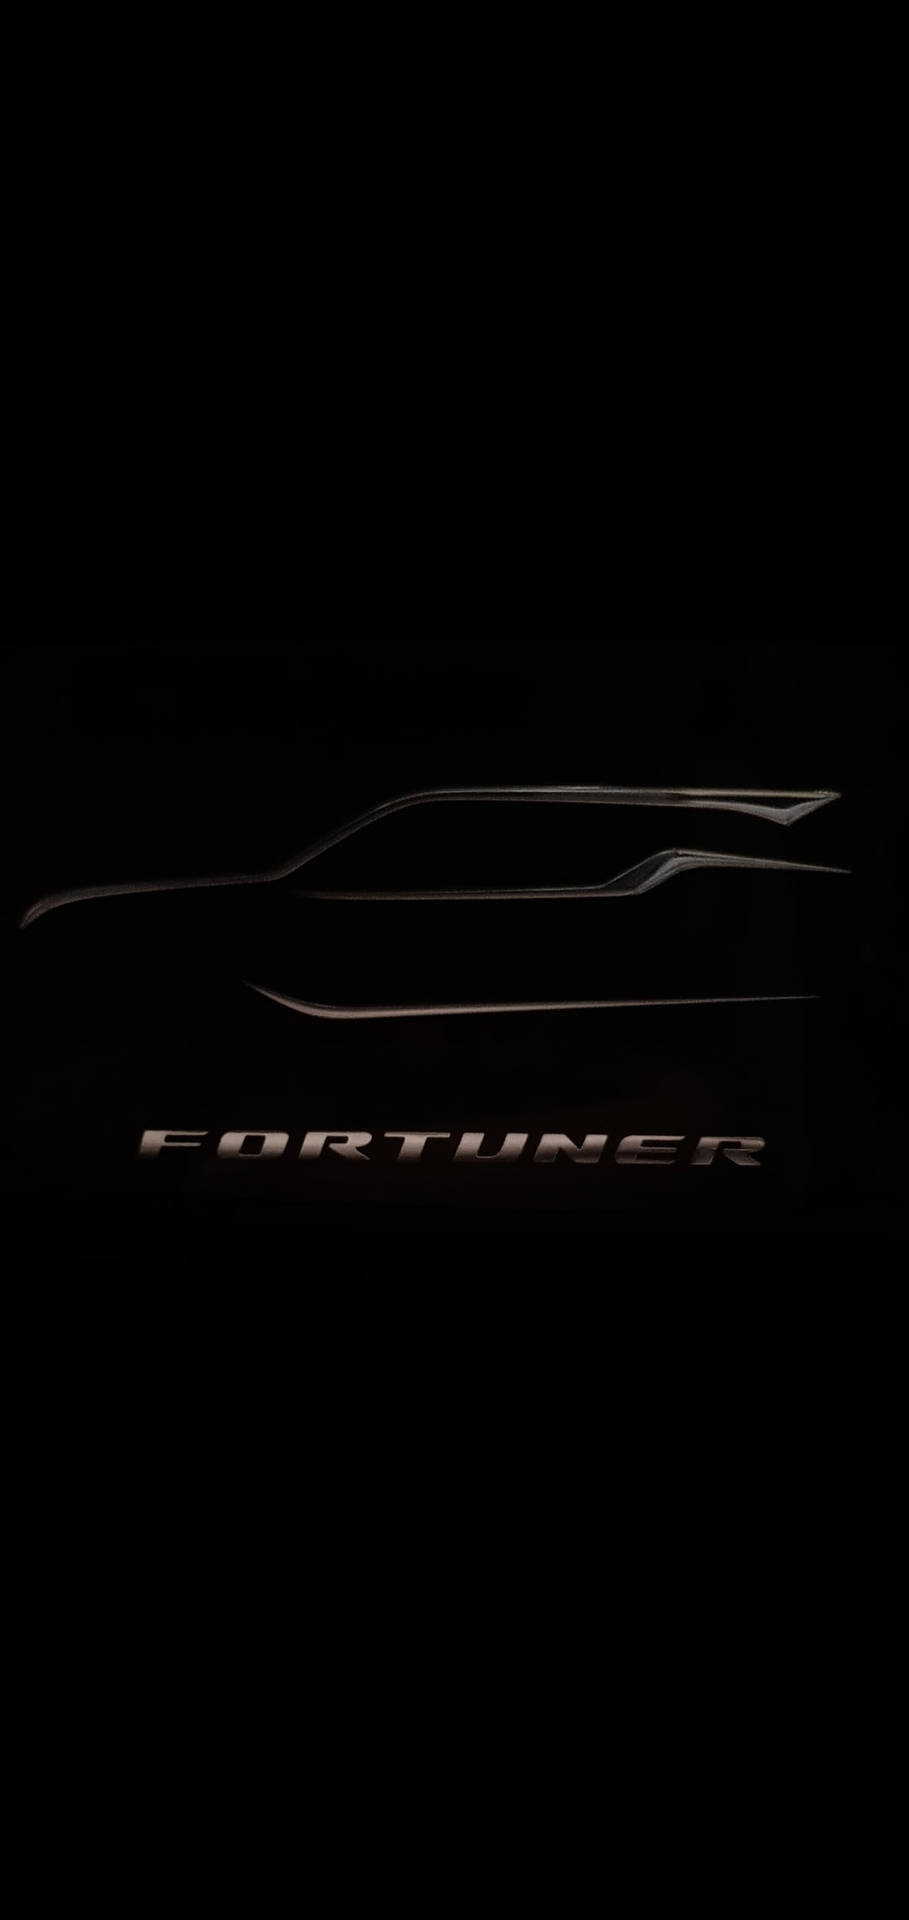 Toyotafortuner Svart Logotyp (as A Suggestion For A Computer Or Mobile Wallpaper) Wallpaper